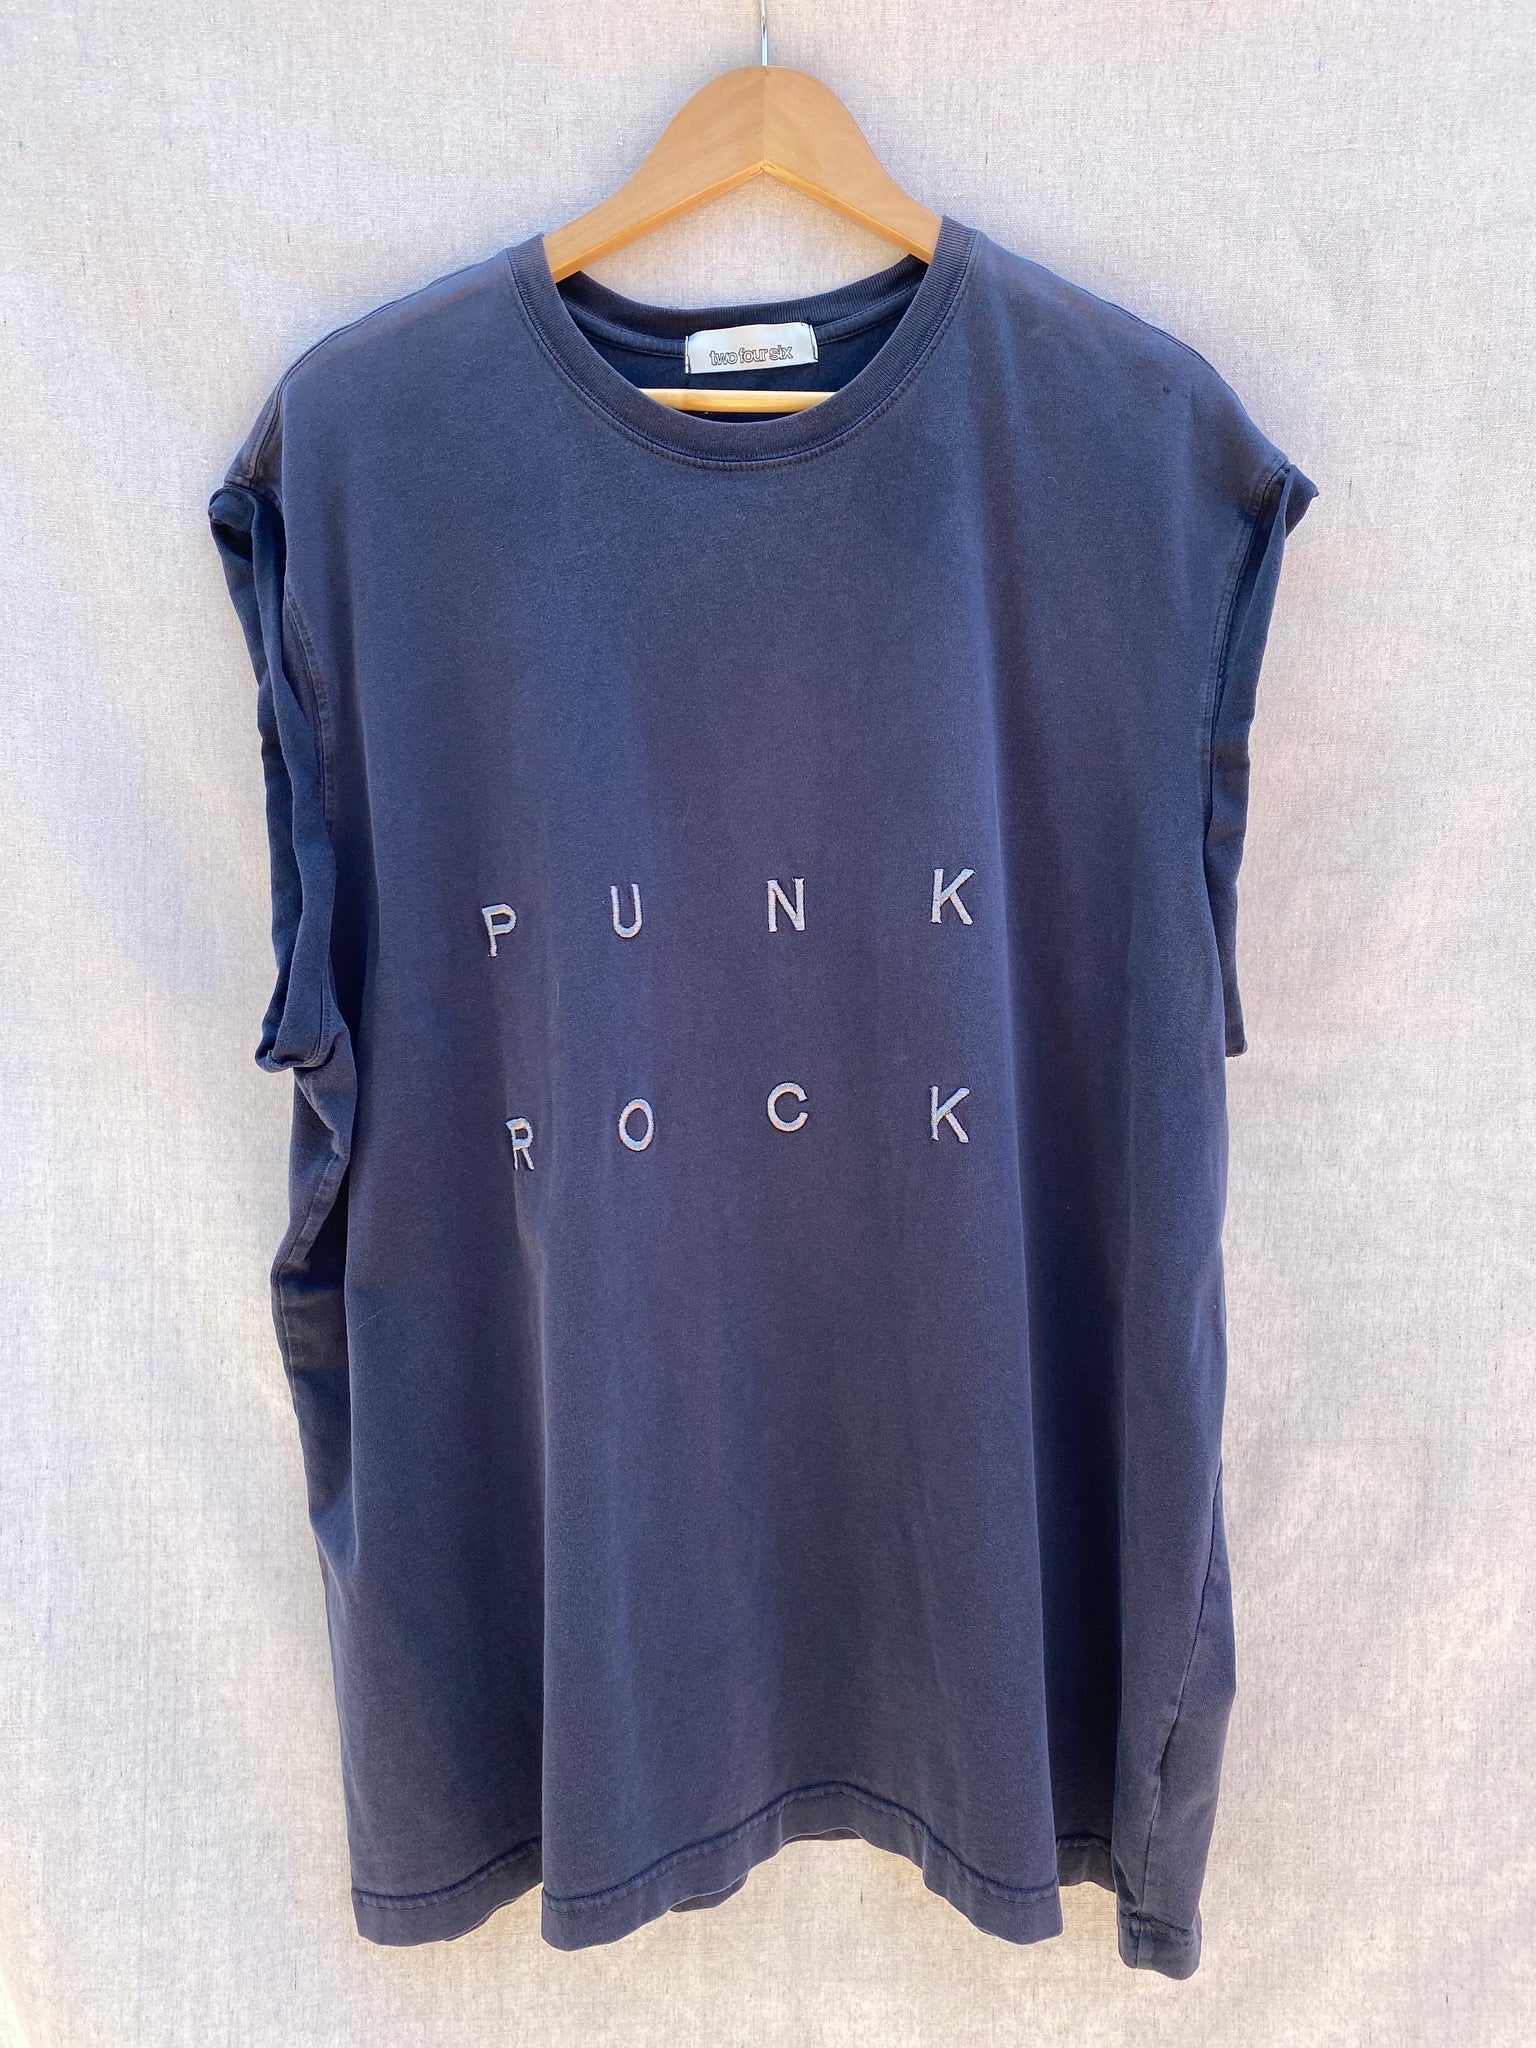 FRONT VIEW OF DARK NAVY MUSCLE TEE WITH PUNK ROCK EMBROIDERY.